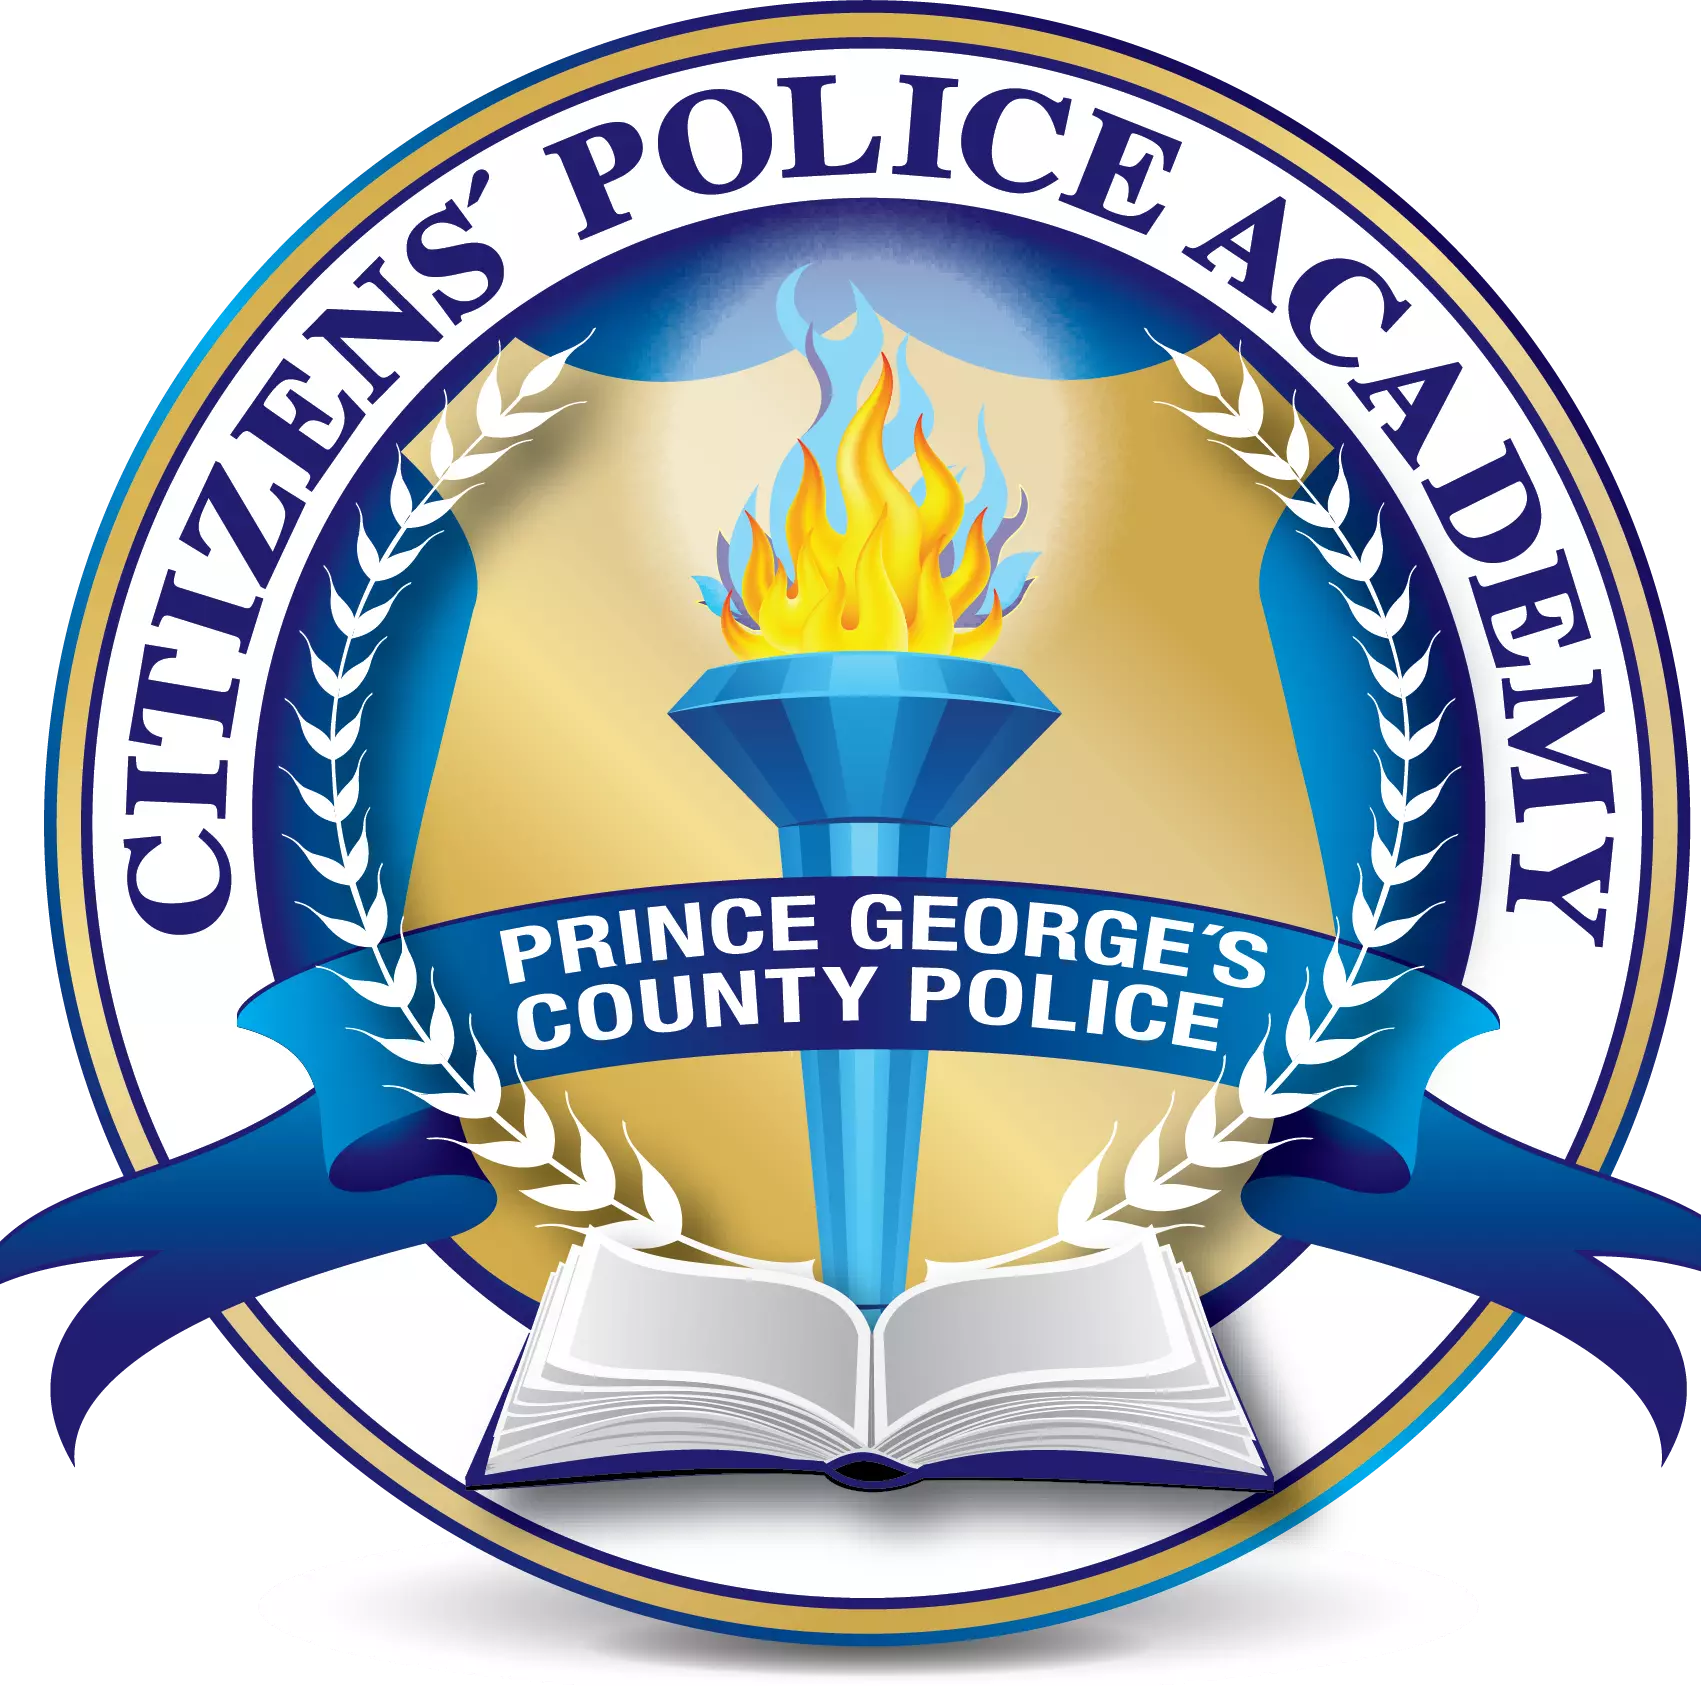 Citizen's Police Academy Session Number 50